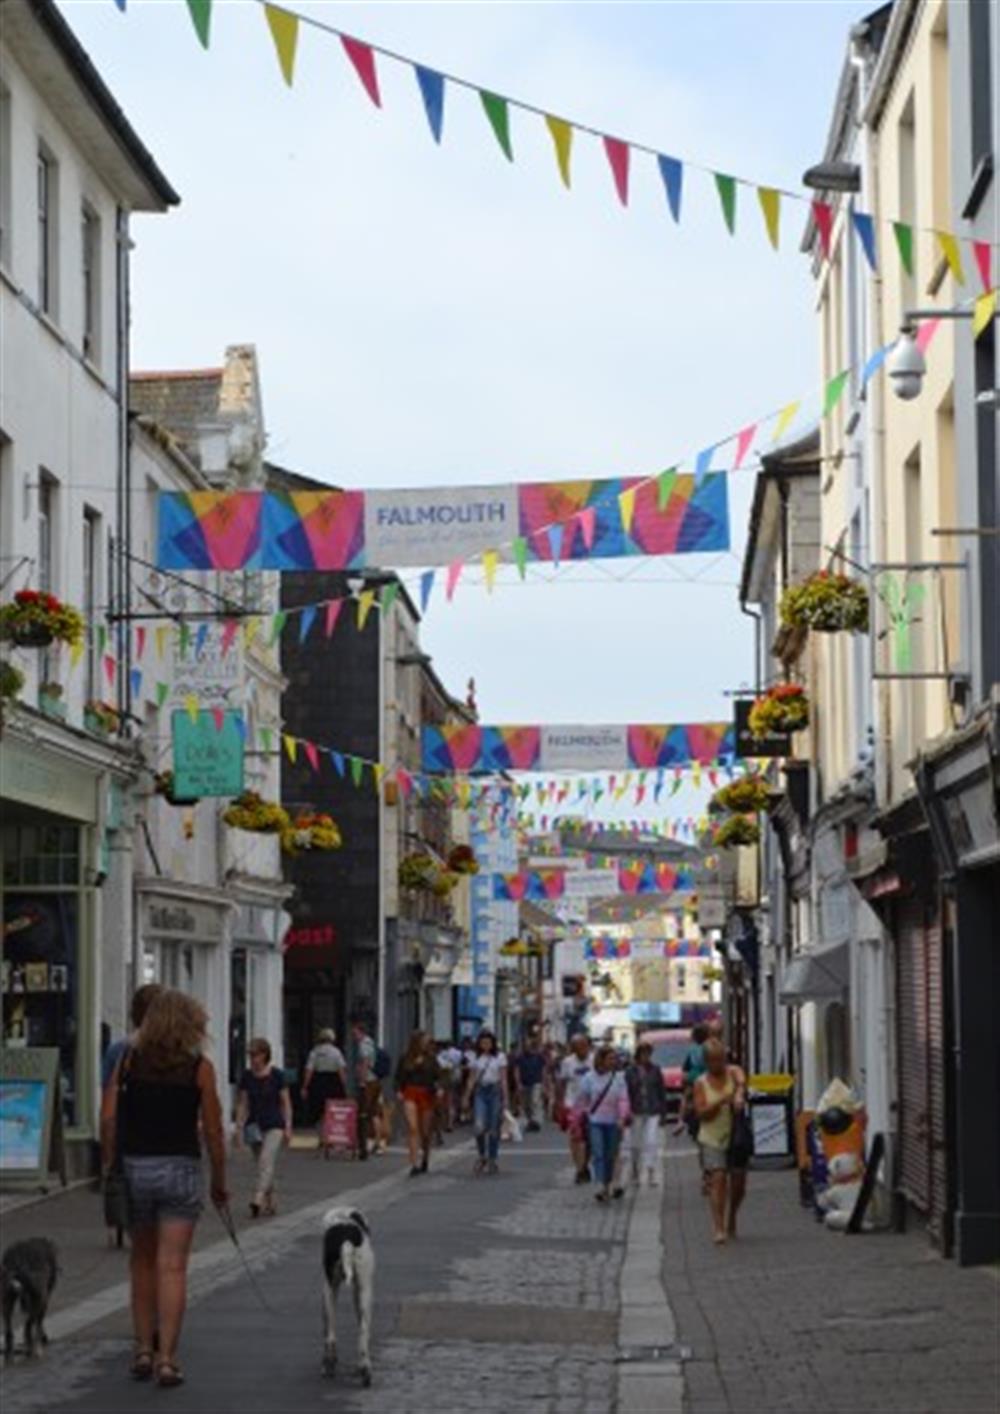 Falmouth High Street for your shopping needs. at Demelza 4 in Helford Passage